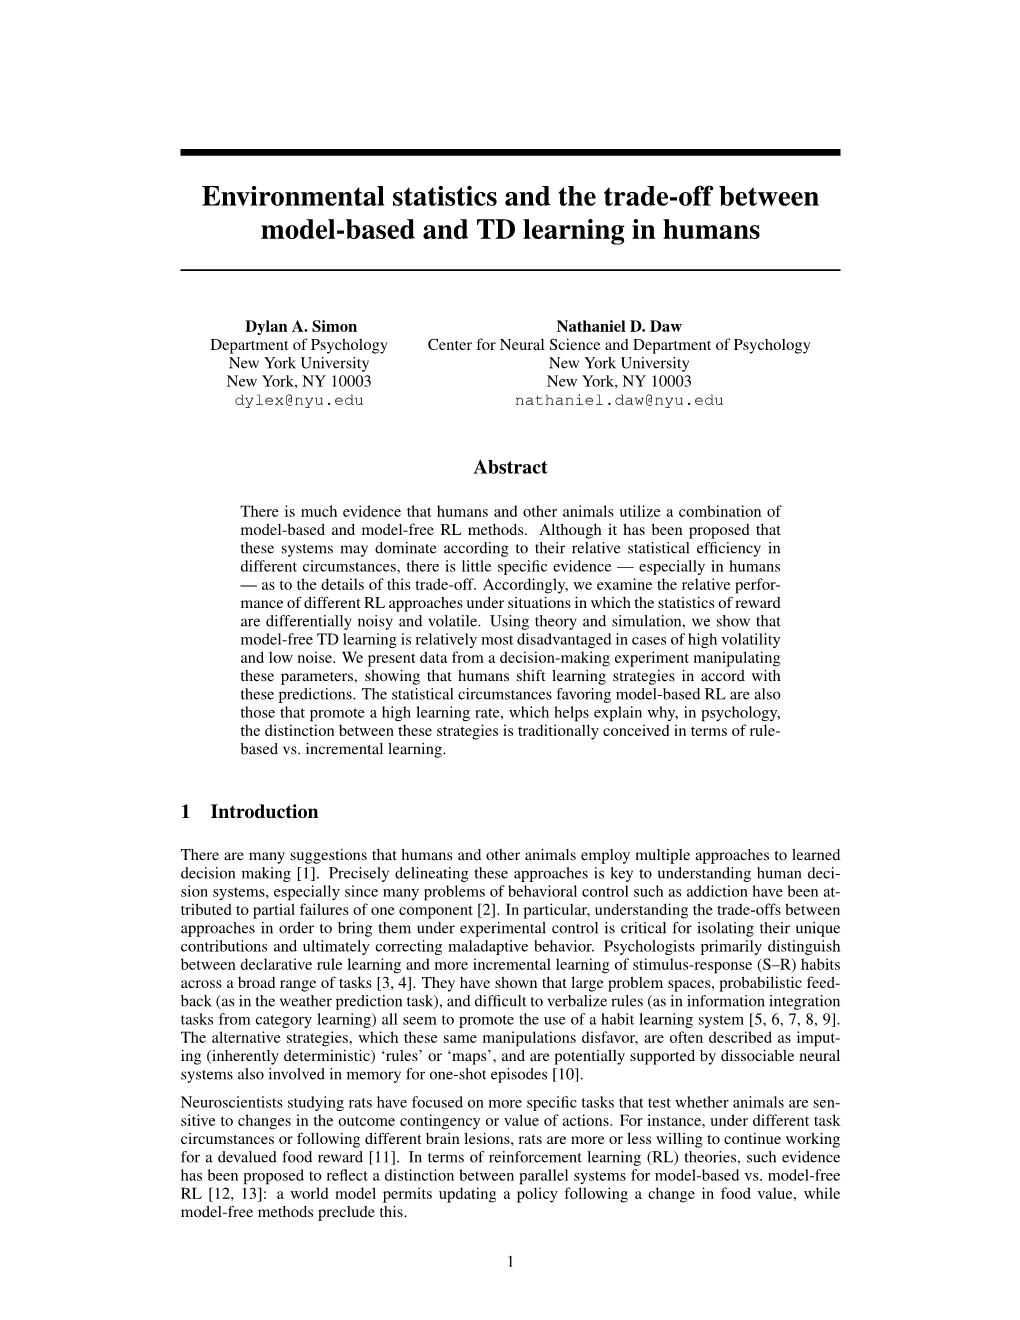 Environmental Statistics and the Trade-Off Between Model-Based and TD Learning in Humans